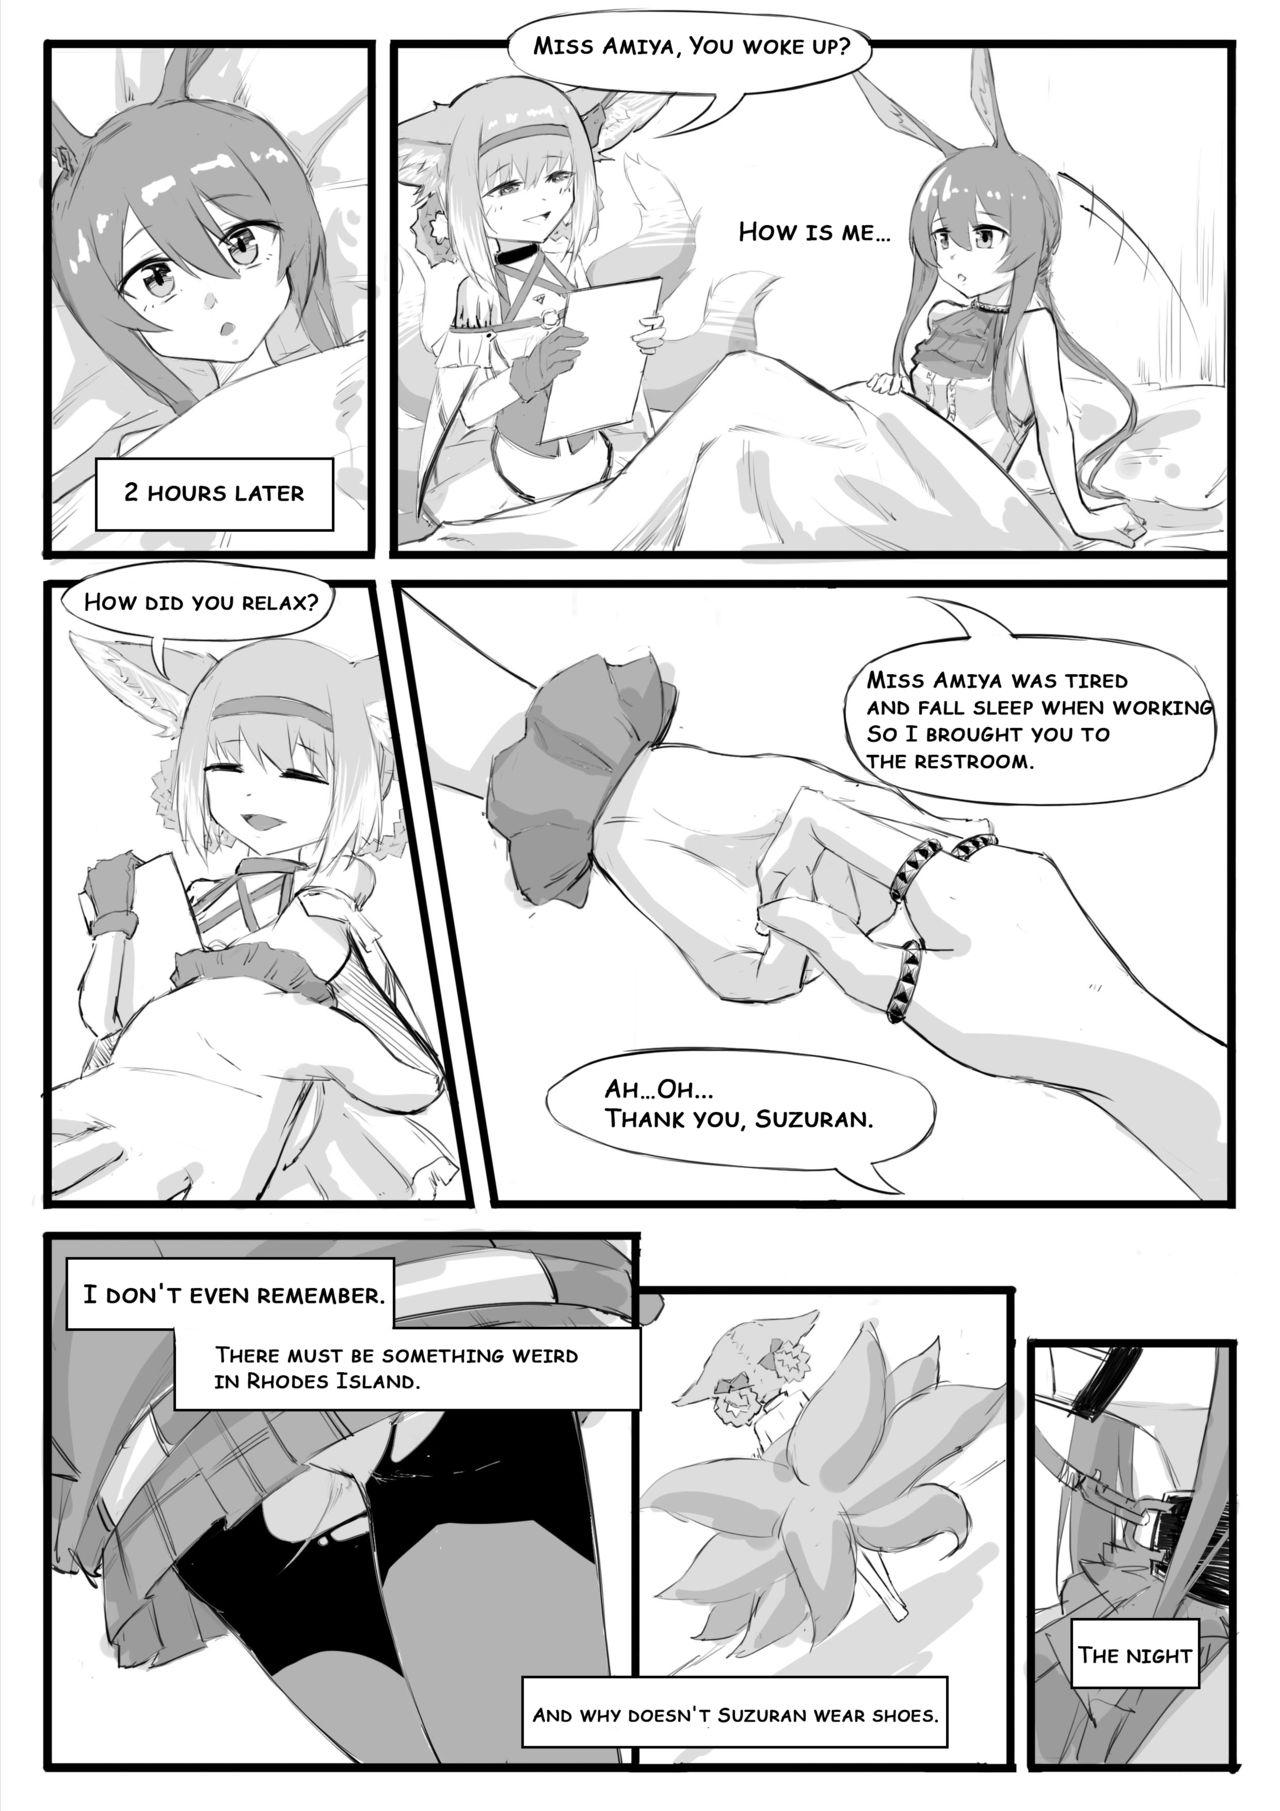 Gay Bareback There Are Weird Things in the Rhodes Island - Arknights Family Sex - Page 13